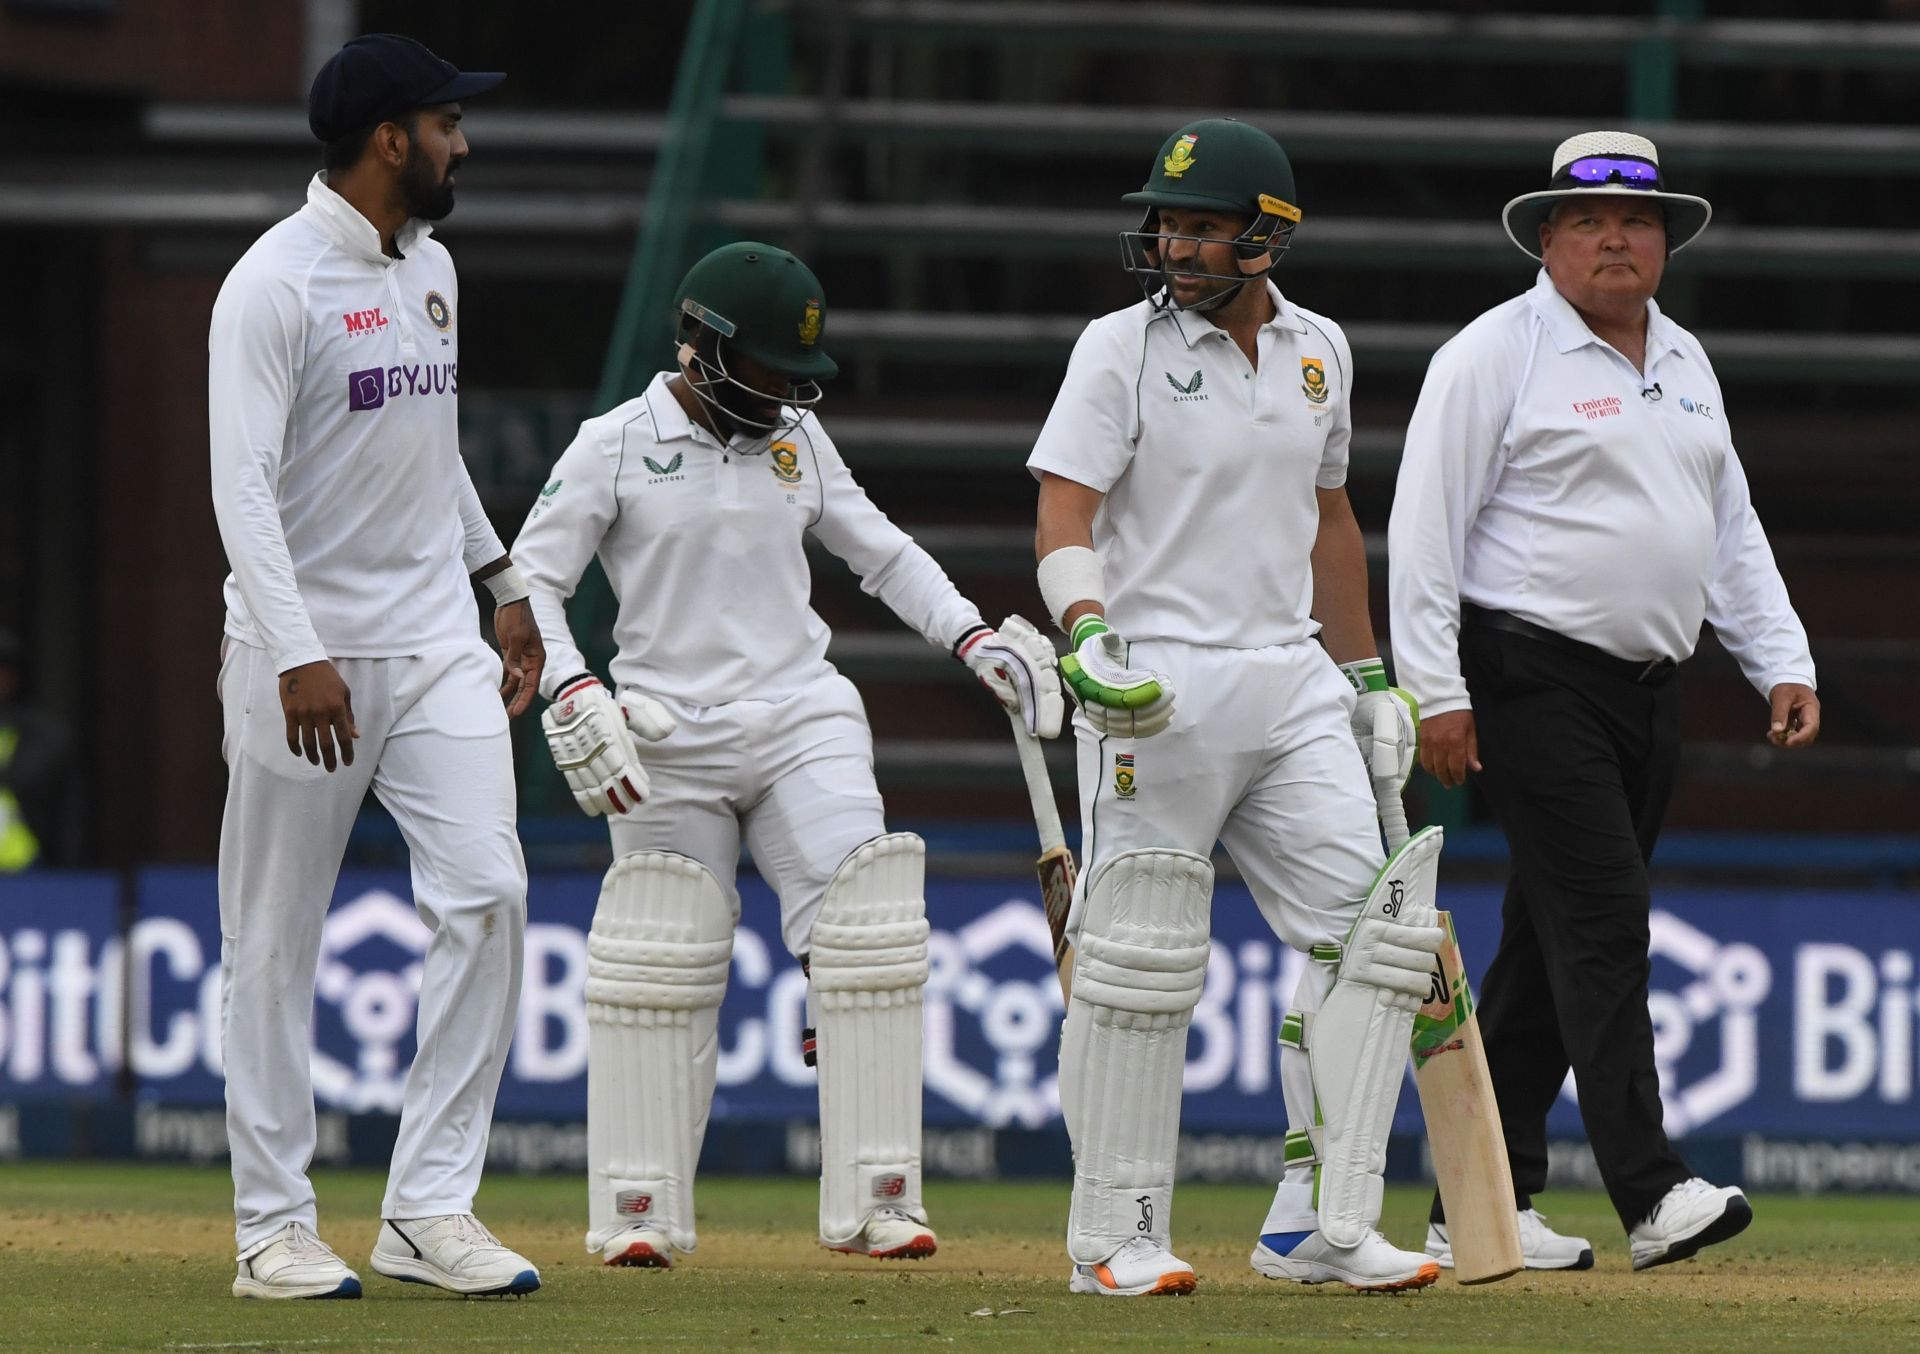 Aakash Chopra pointed out that South Africa have defeated India for the first time at the Wanderers